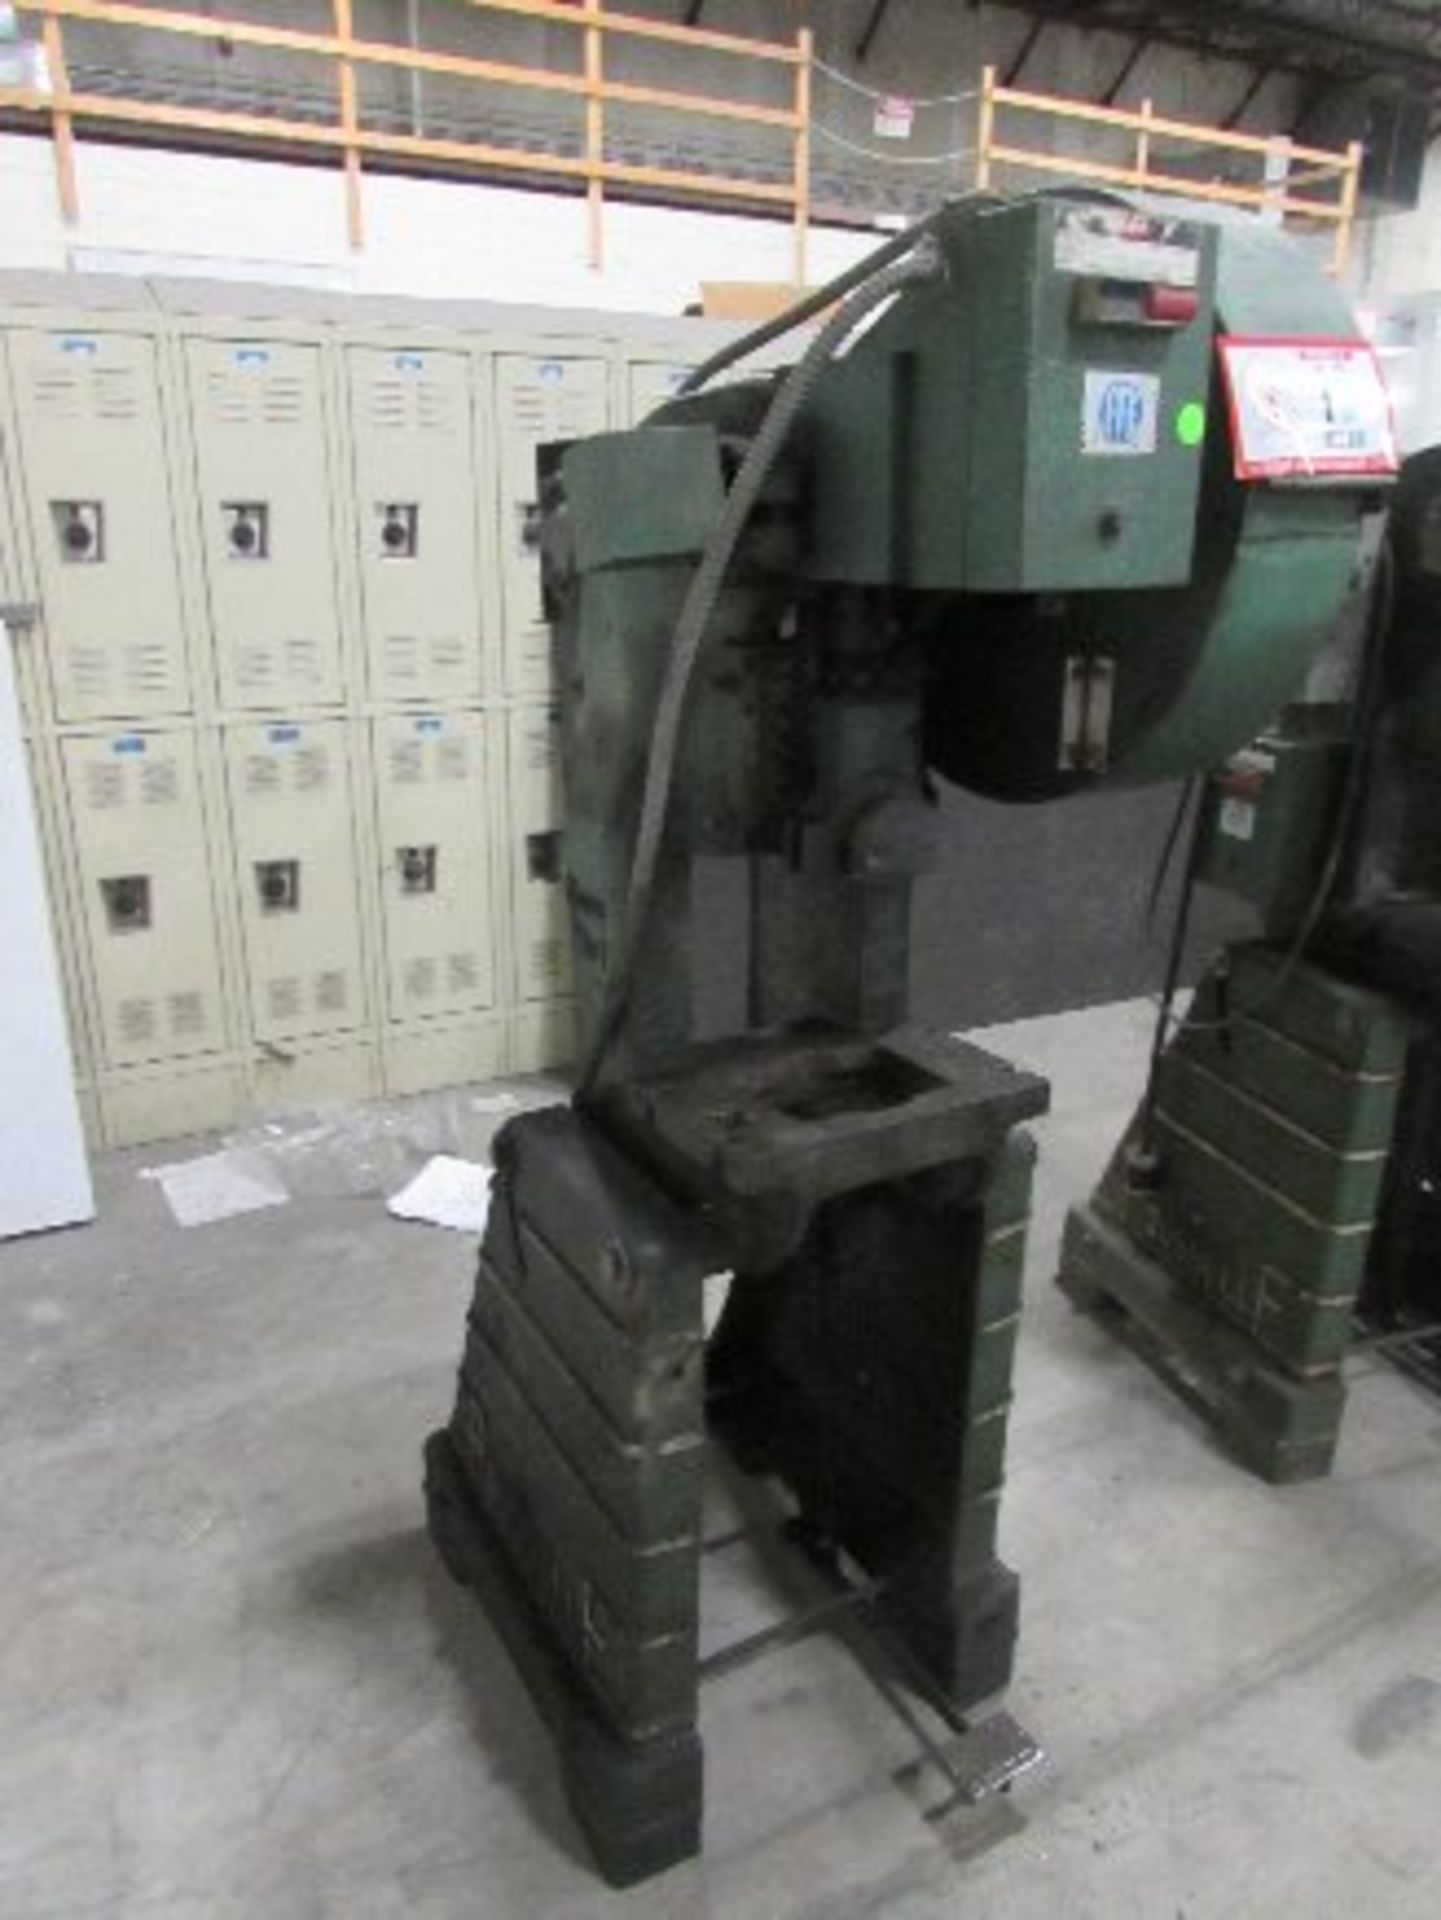 Rousselle No 1A OBI Press, S/N 20037 - Image 2 of 2